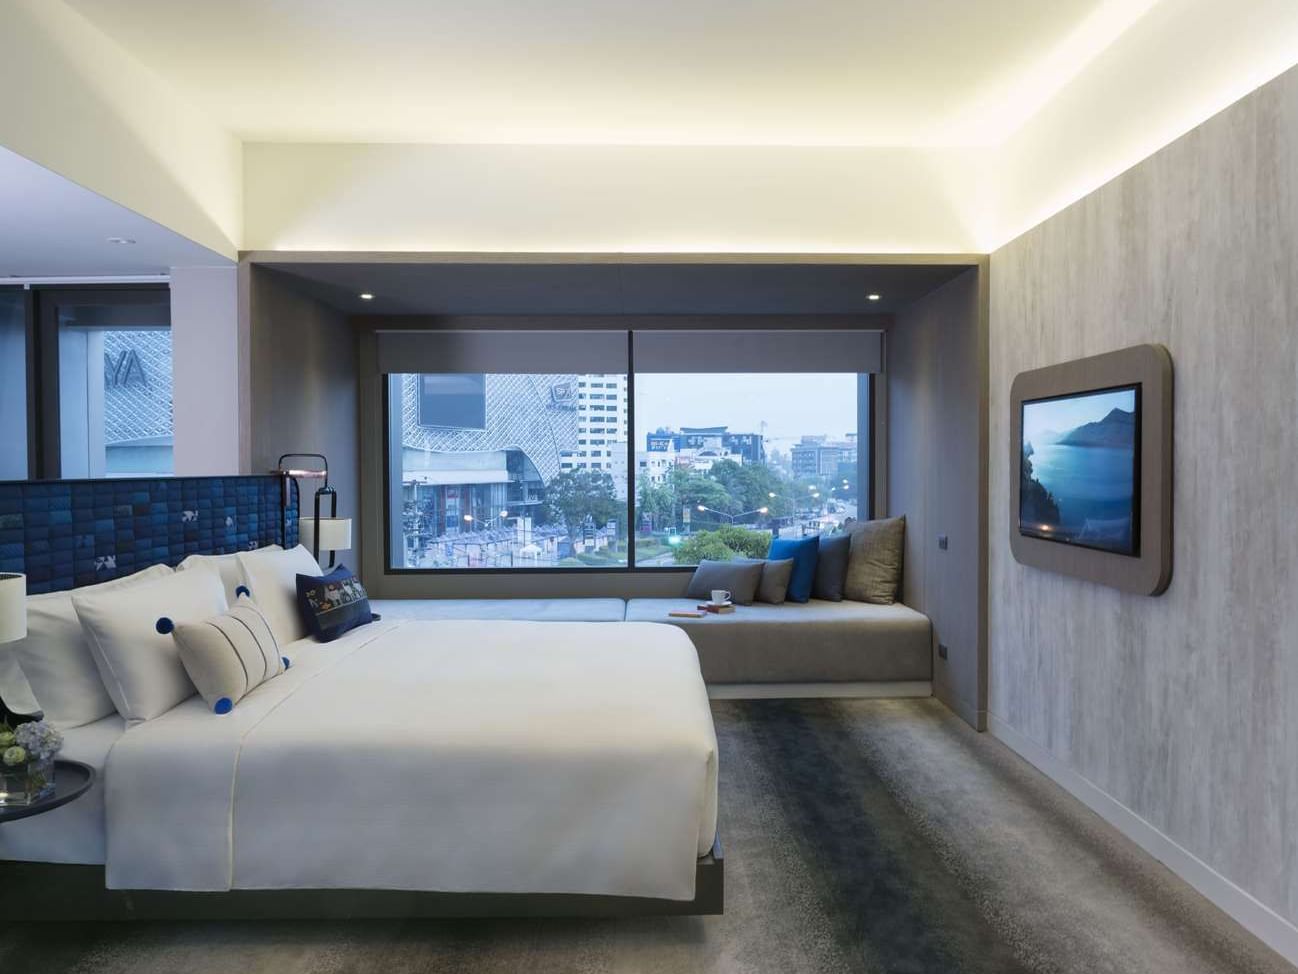 Premium Deluxe Corner room with king size bed at U Hotels